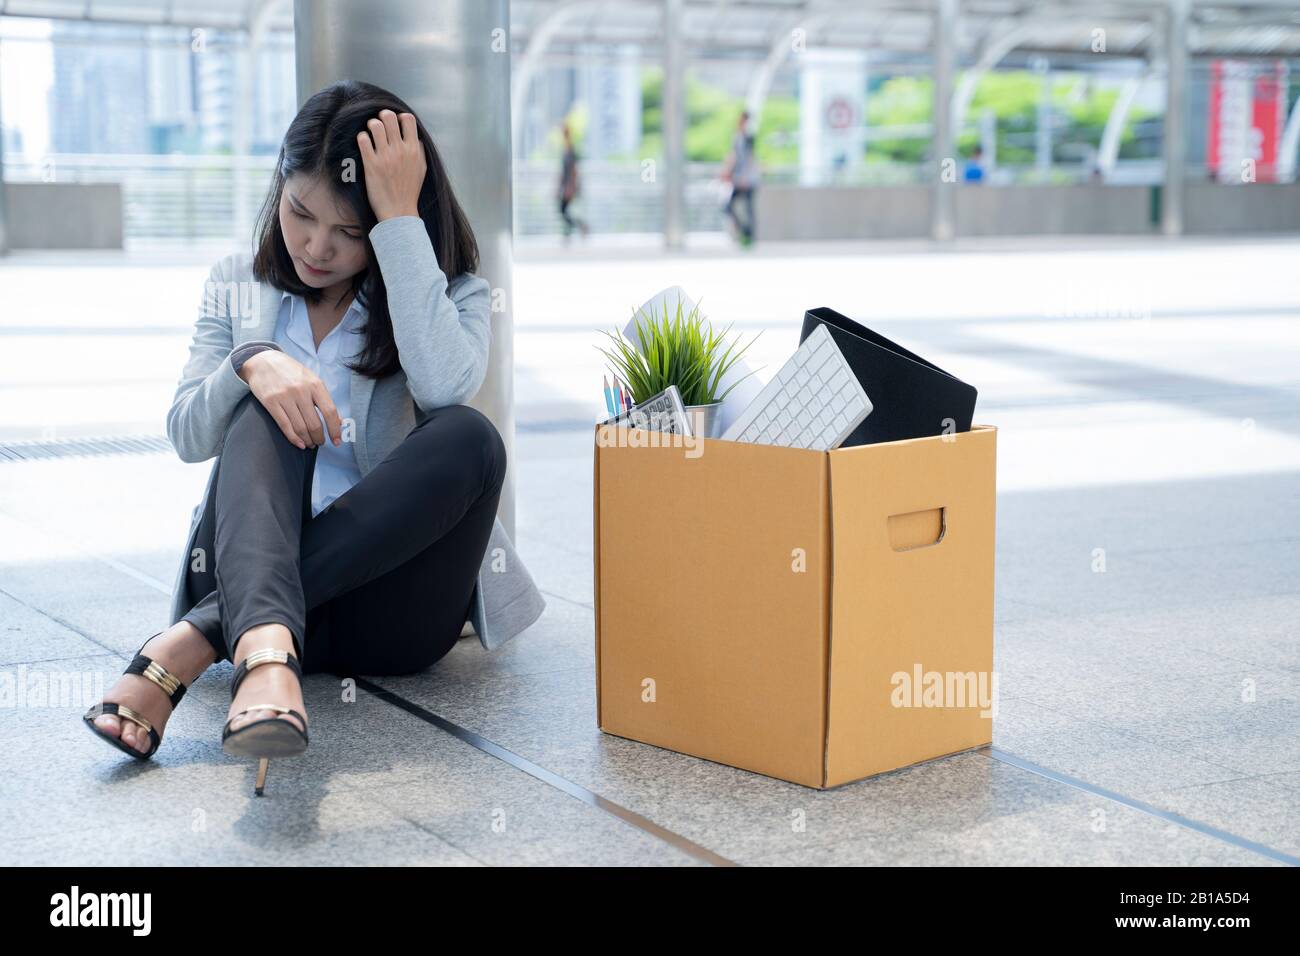 An unemployed business woman sitting in stress. Stock Photo